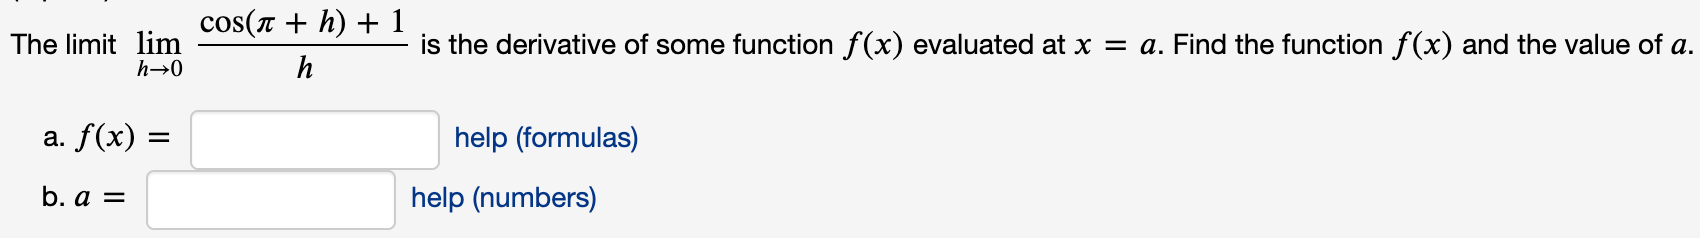 cos(r + h) + 1
The limit lim
h→0
is the derivative of some function f(x) evaluated at x = a. Find the function f(x) and the value of a.
h
a. f(x) =
help (formulas)
%D
b. a =
help (numbers)
